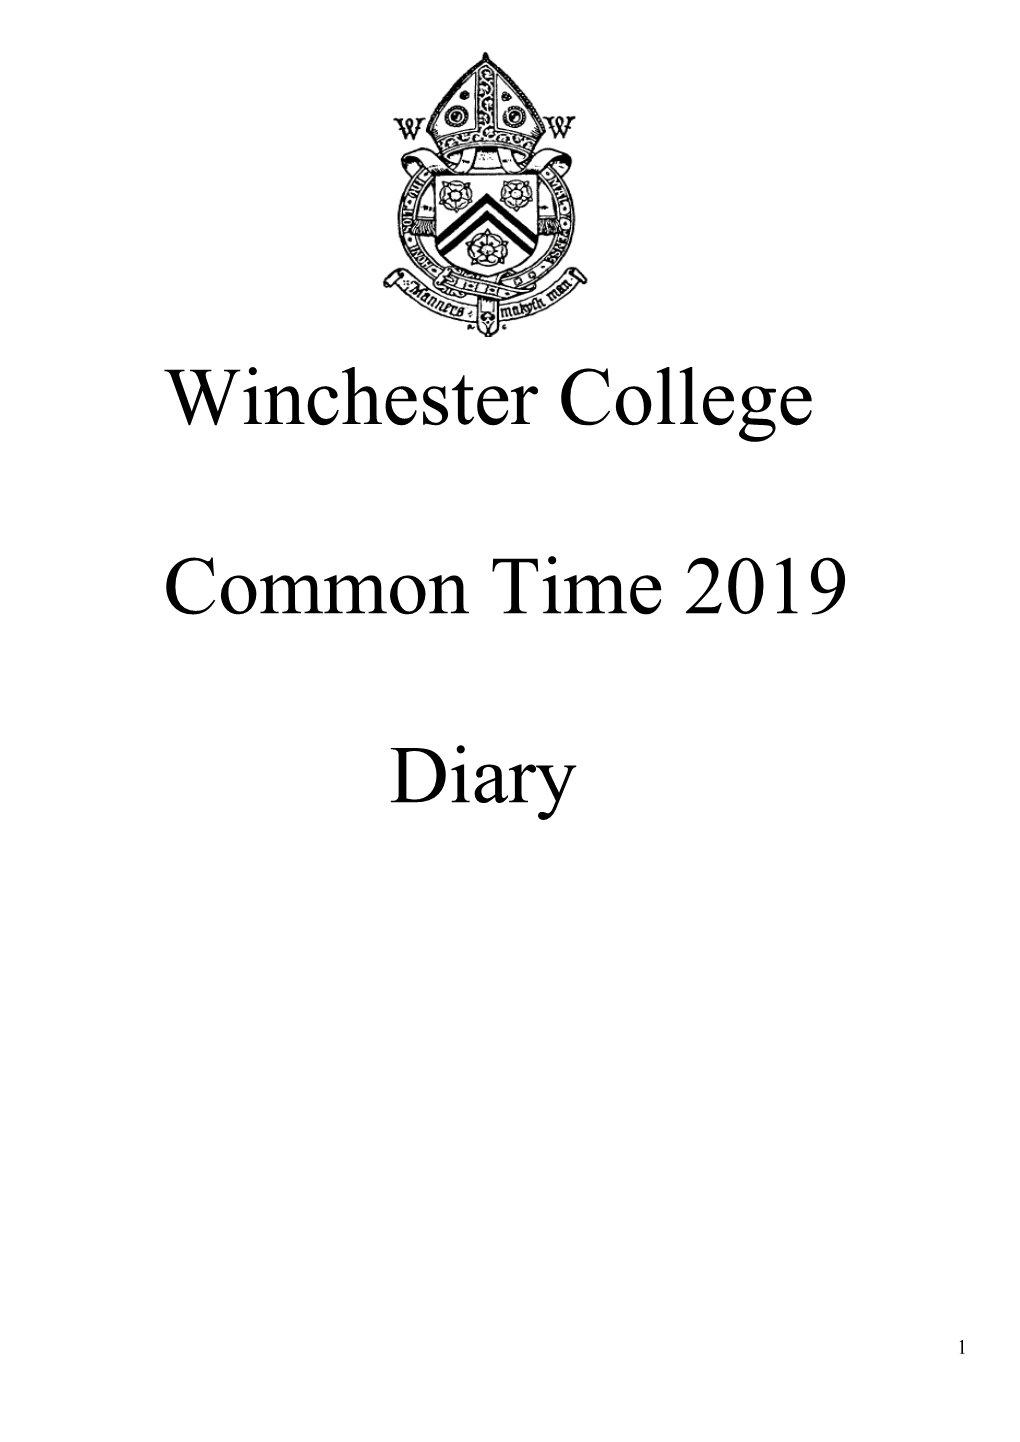 Winchester College Common Time 2019 Diary